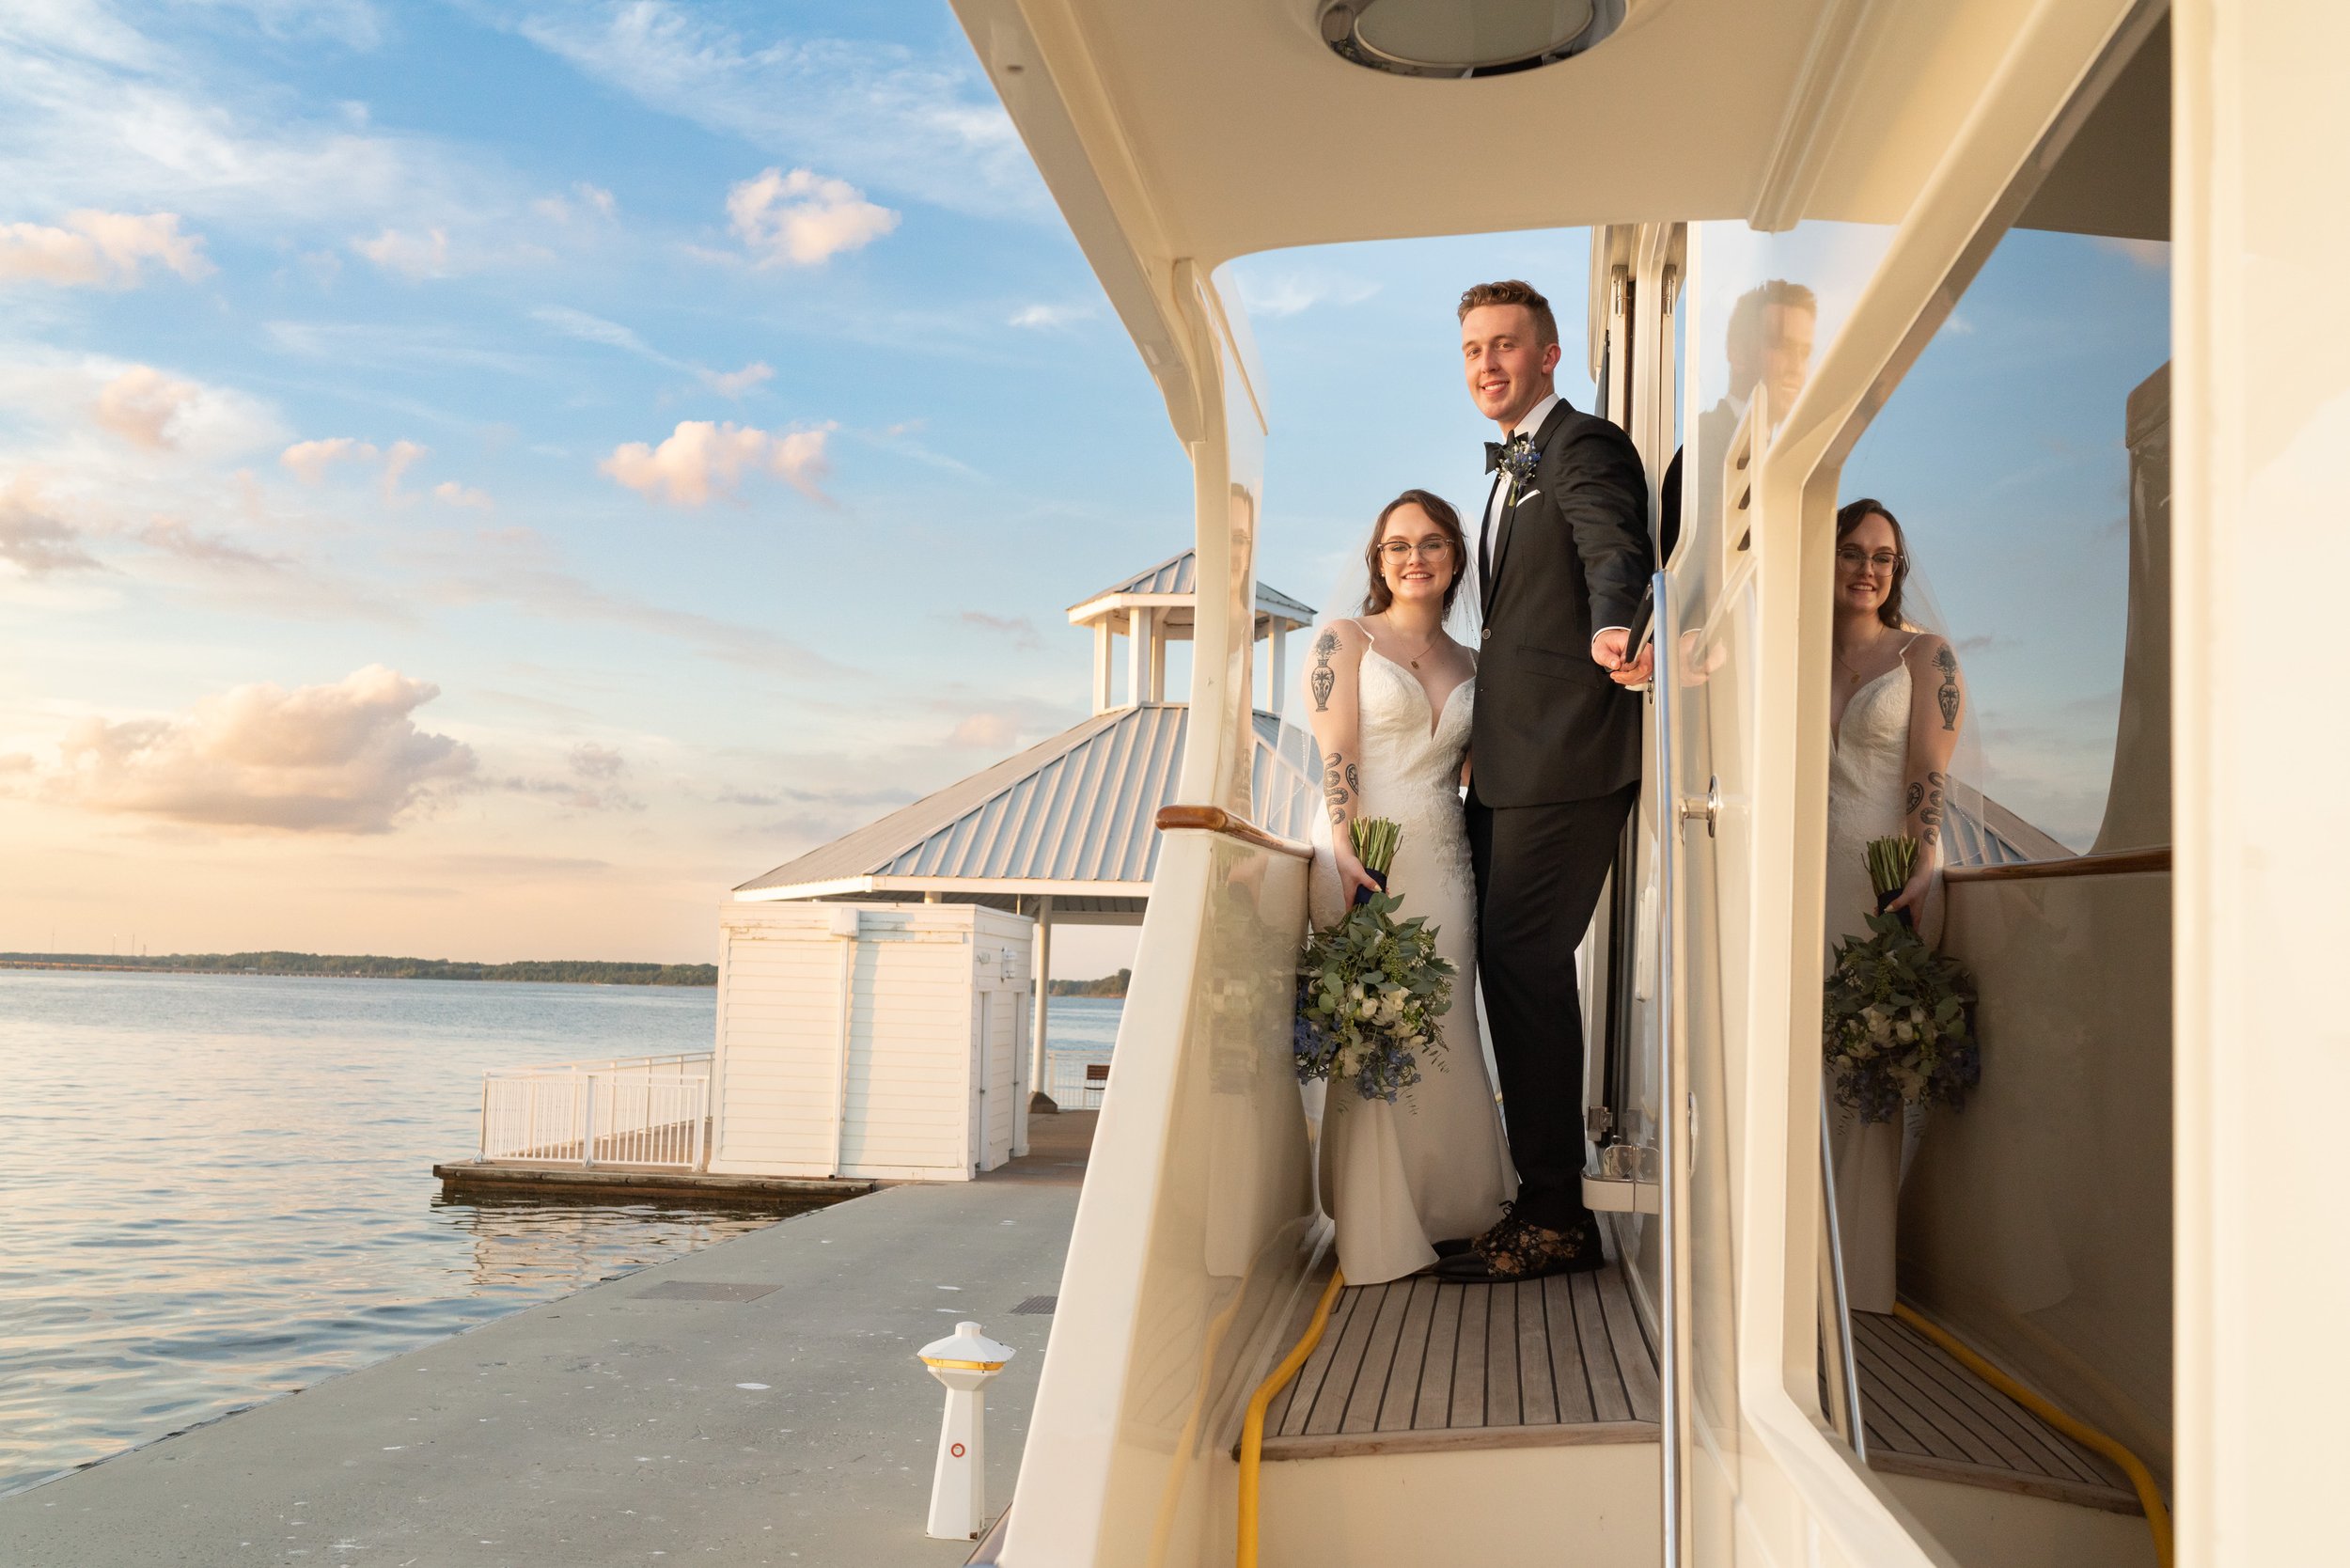 Bride and groom on yacht in Annapolis md during wedding photos at Hyatt Regency Chesapeake